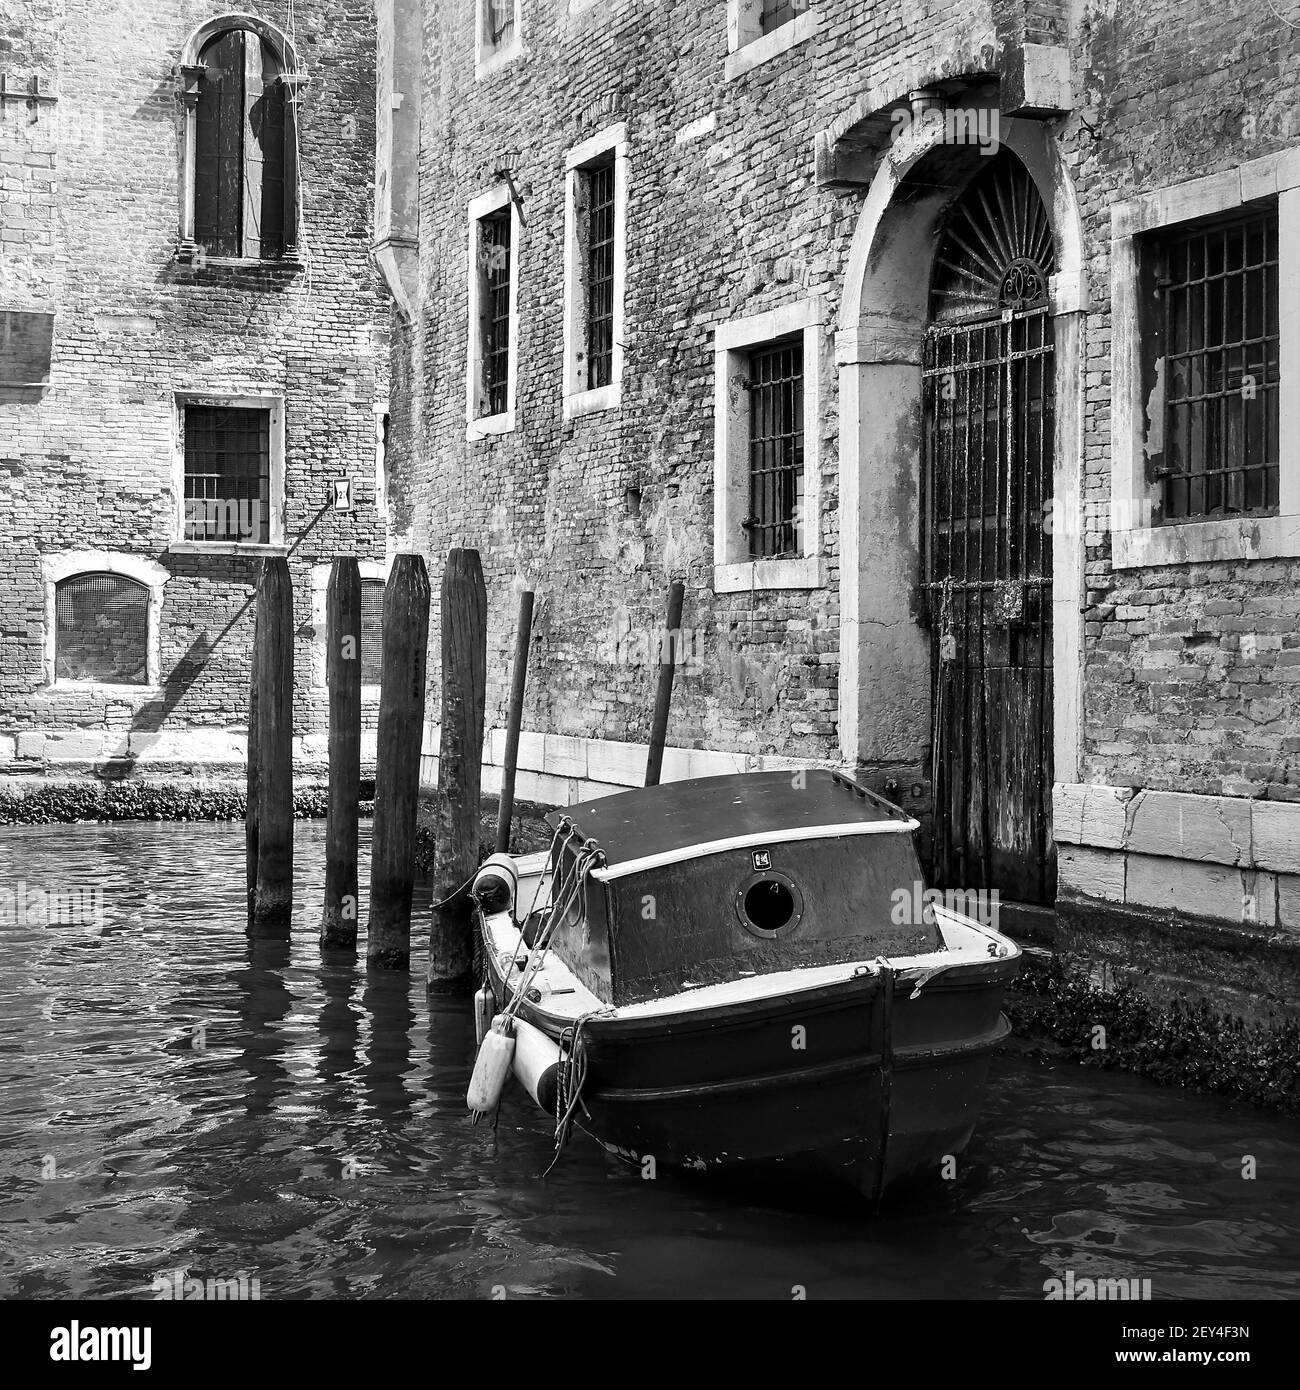 Venetian side canal with old boat, Venice, Italy. Black and white photography, cityscape Stock Photo